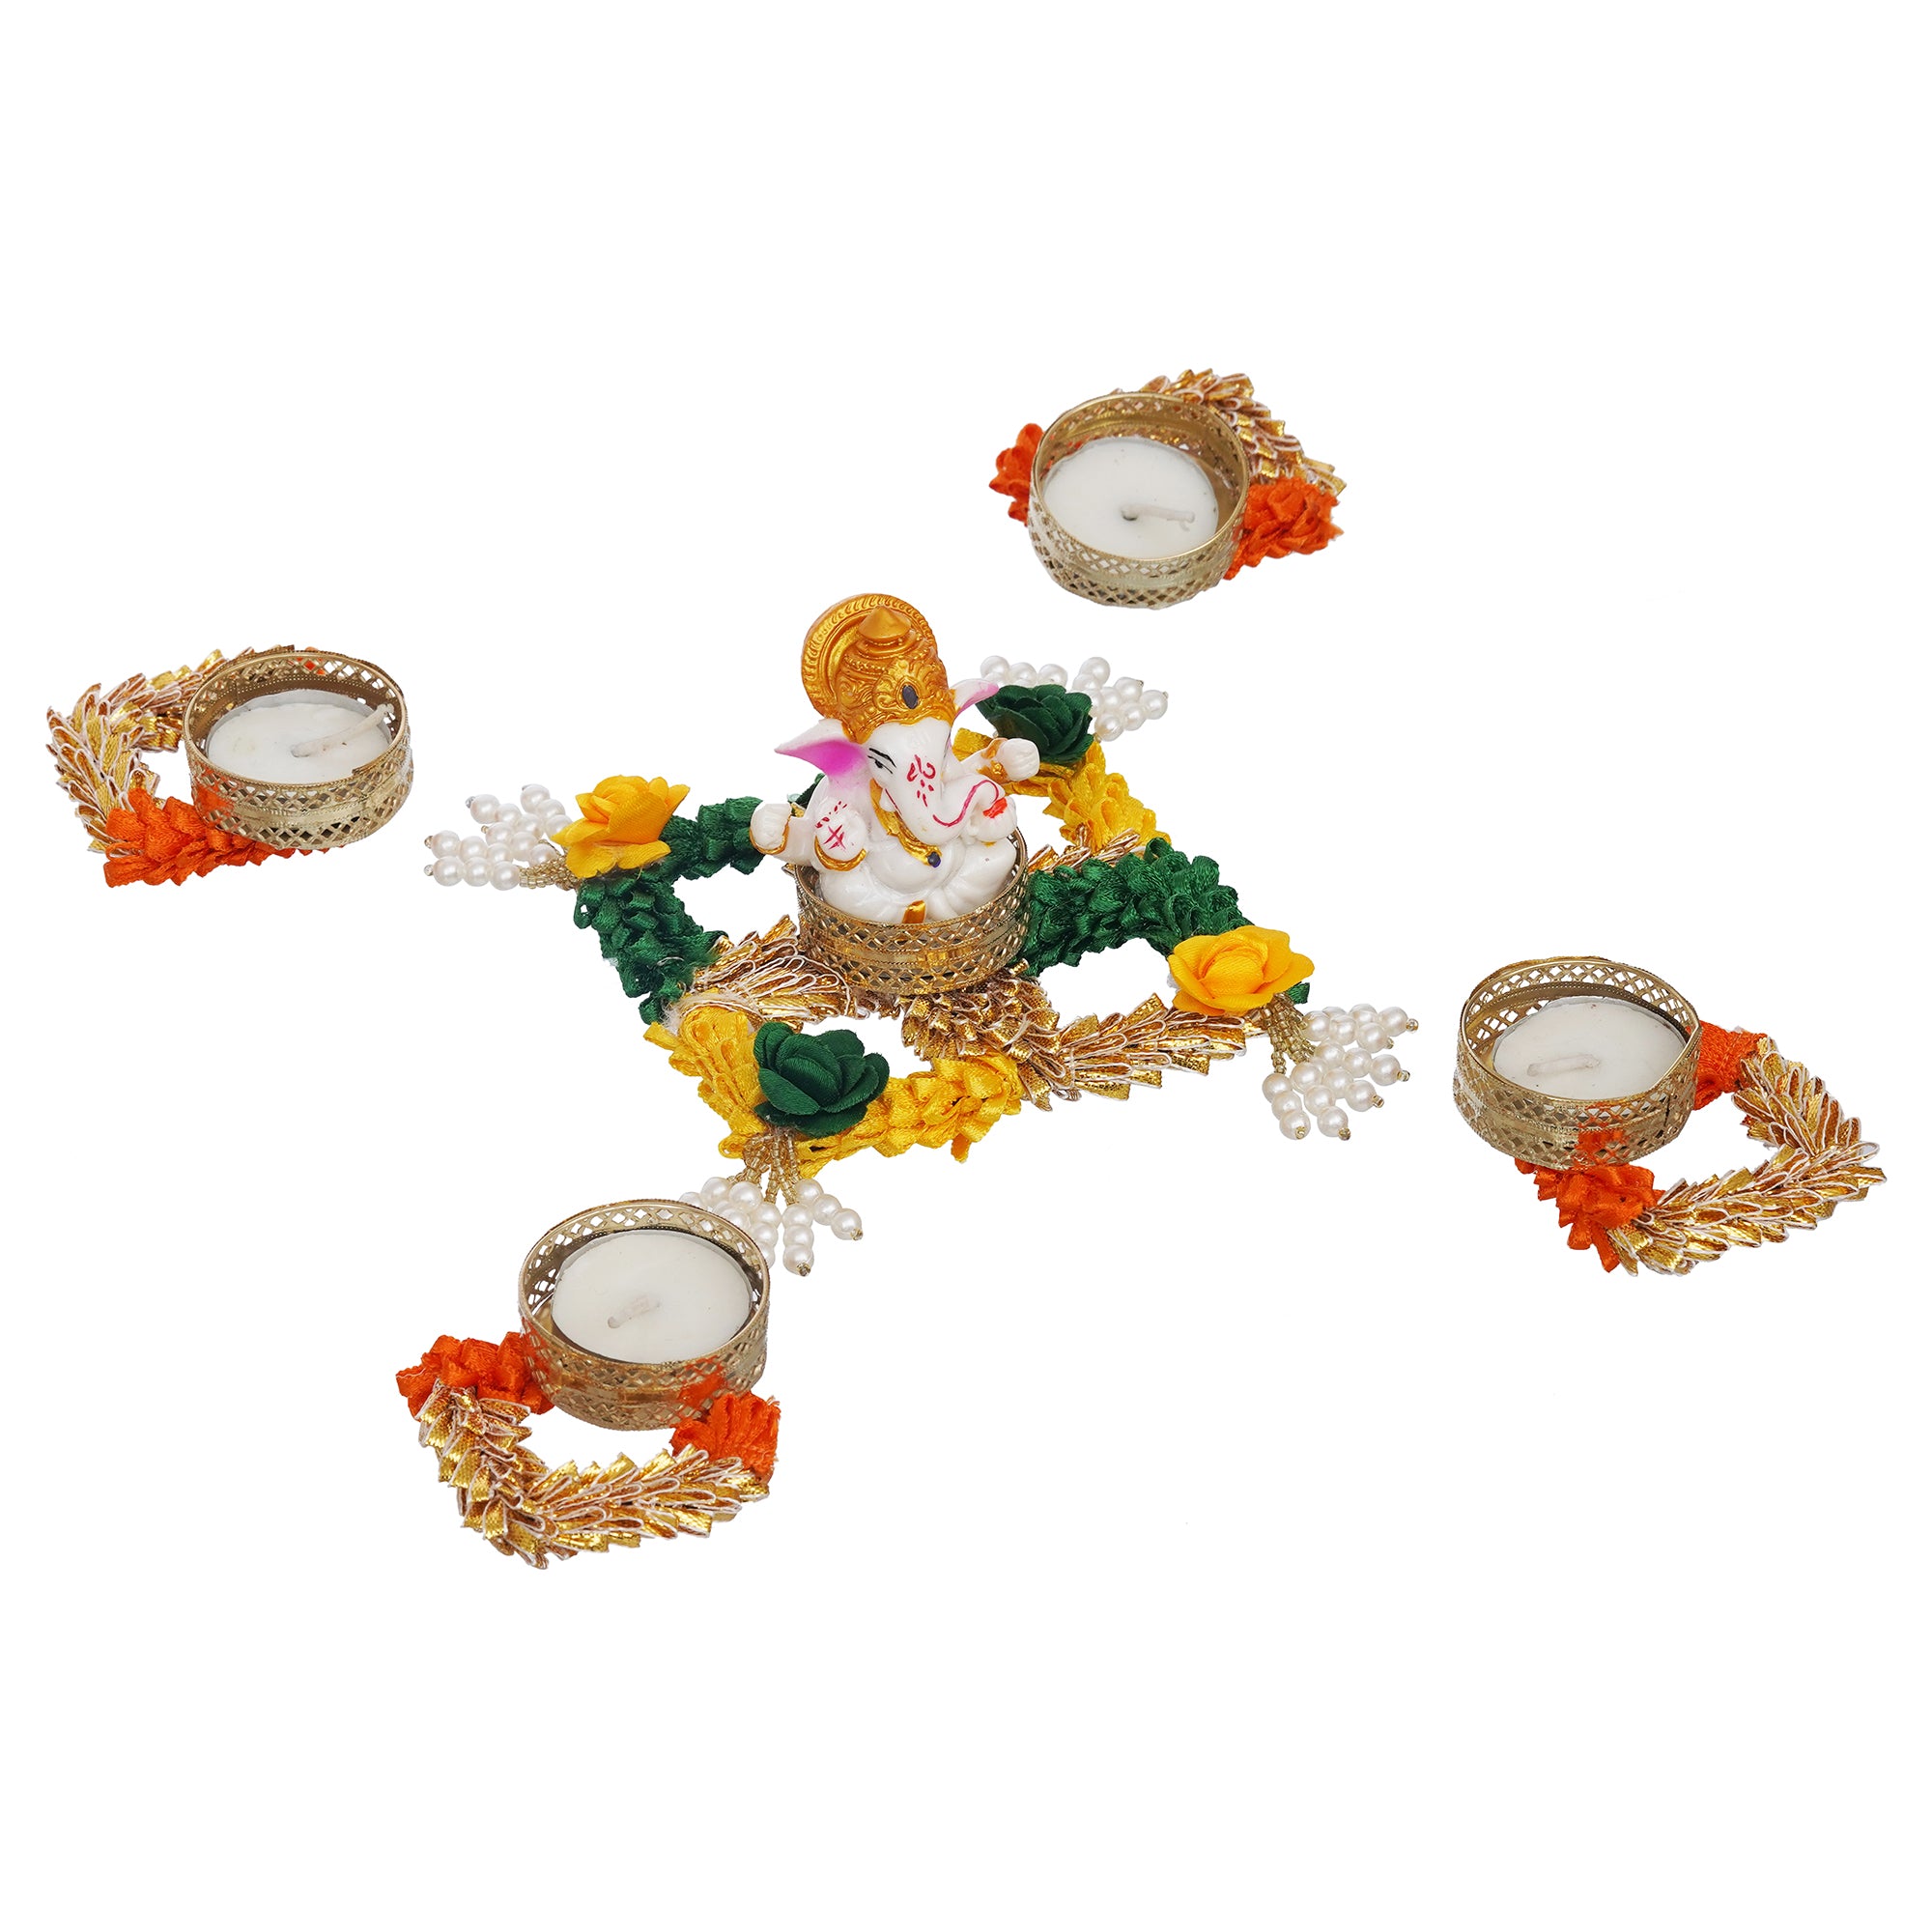 eCraftIndia Lord Ganesha Idol on Floral and Beads Embellished Handcrafted Plate with 4 Decorative Tea Light Candle Holders 6